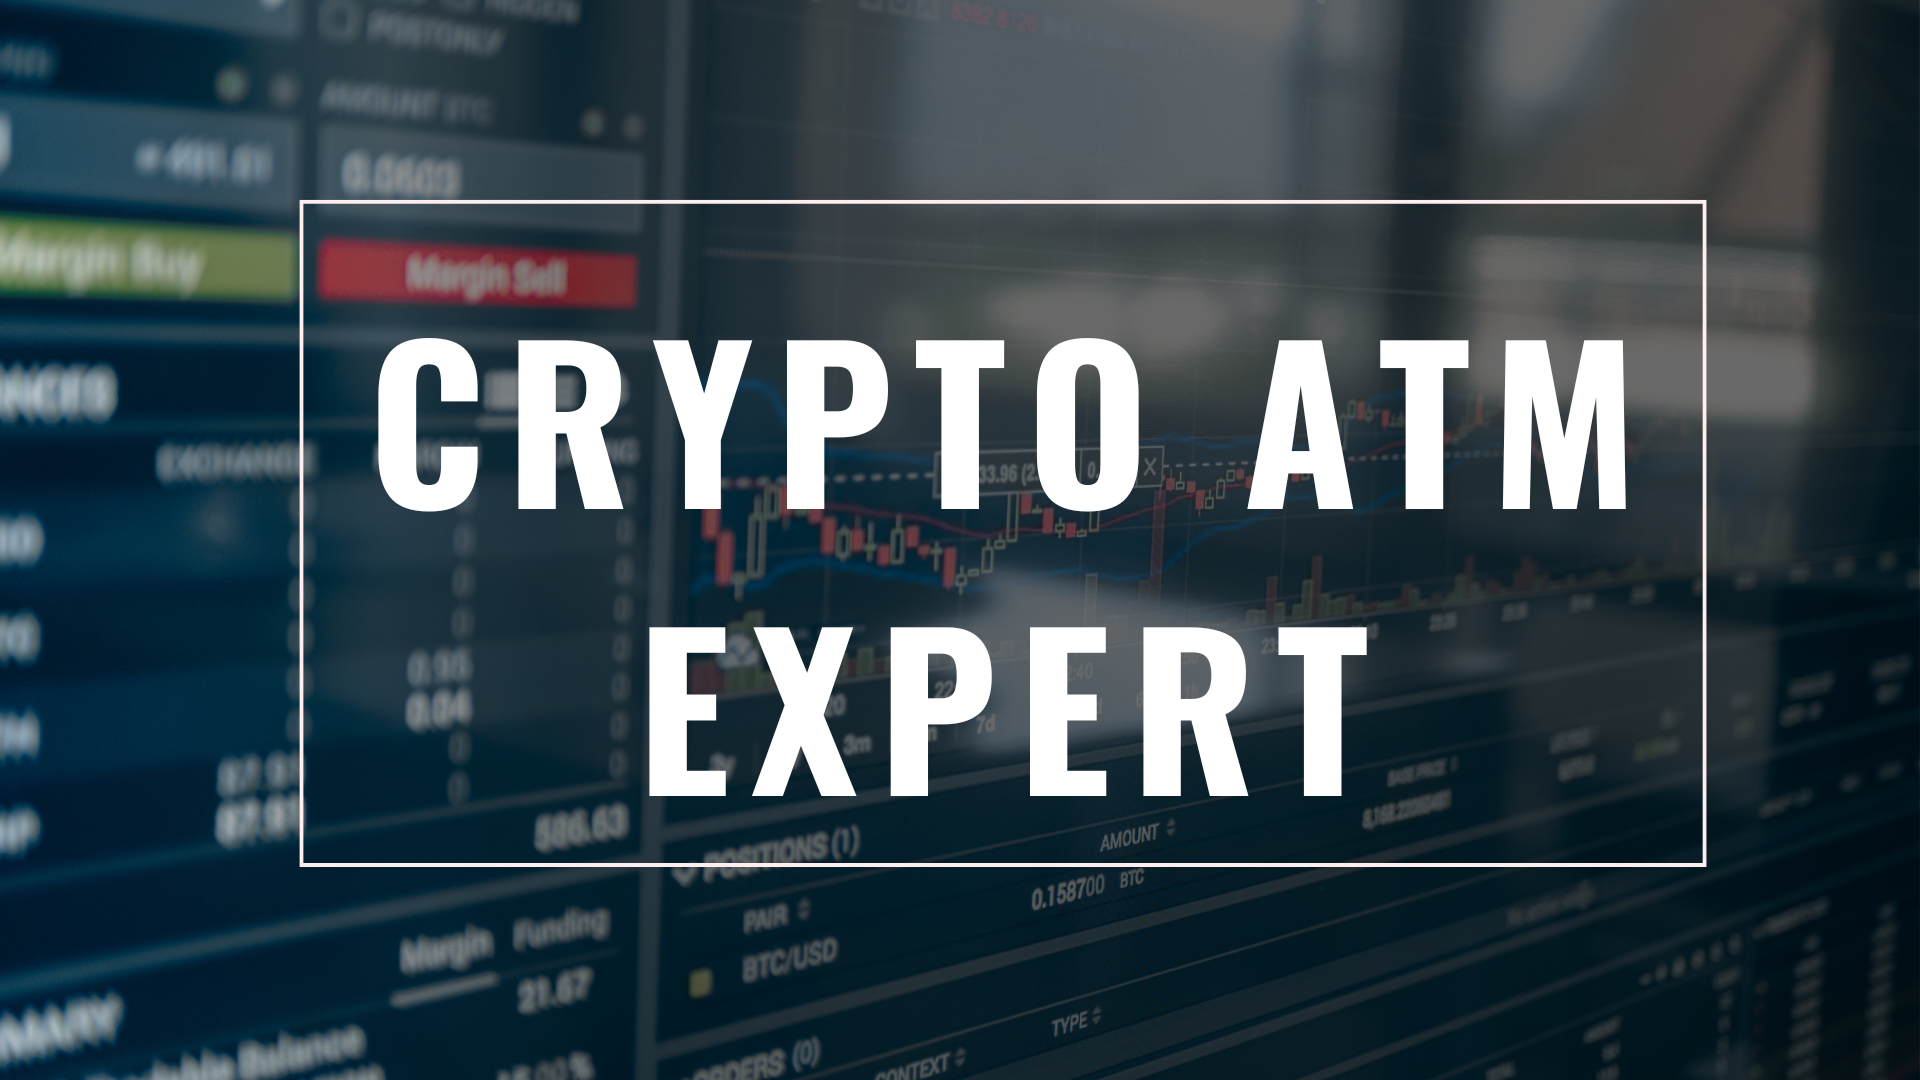 Crypto ATM Expert Cover Image